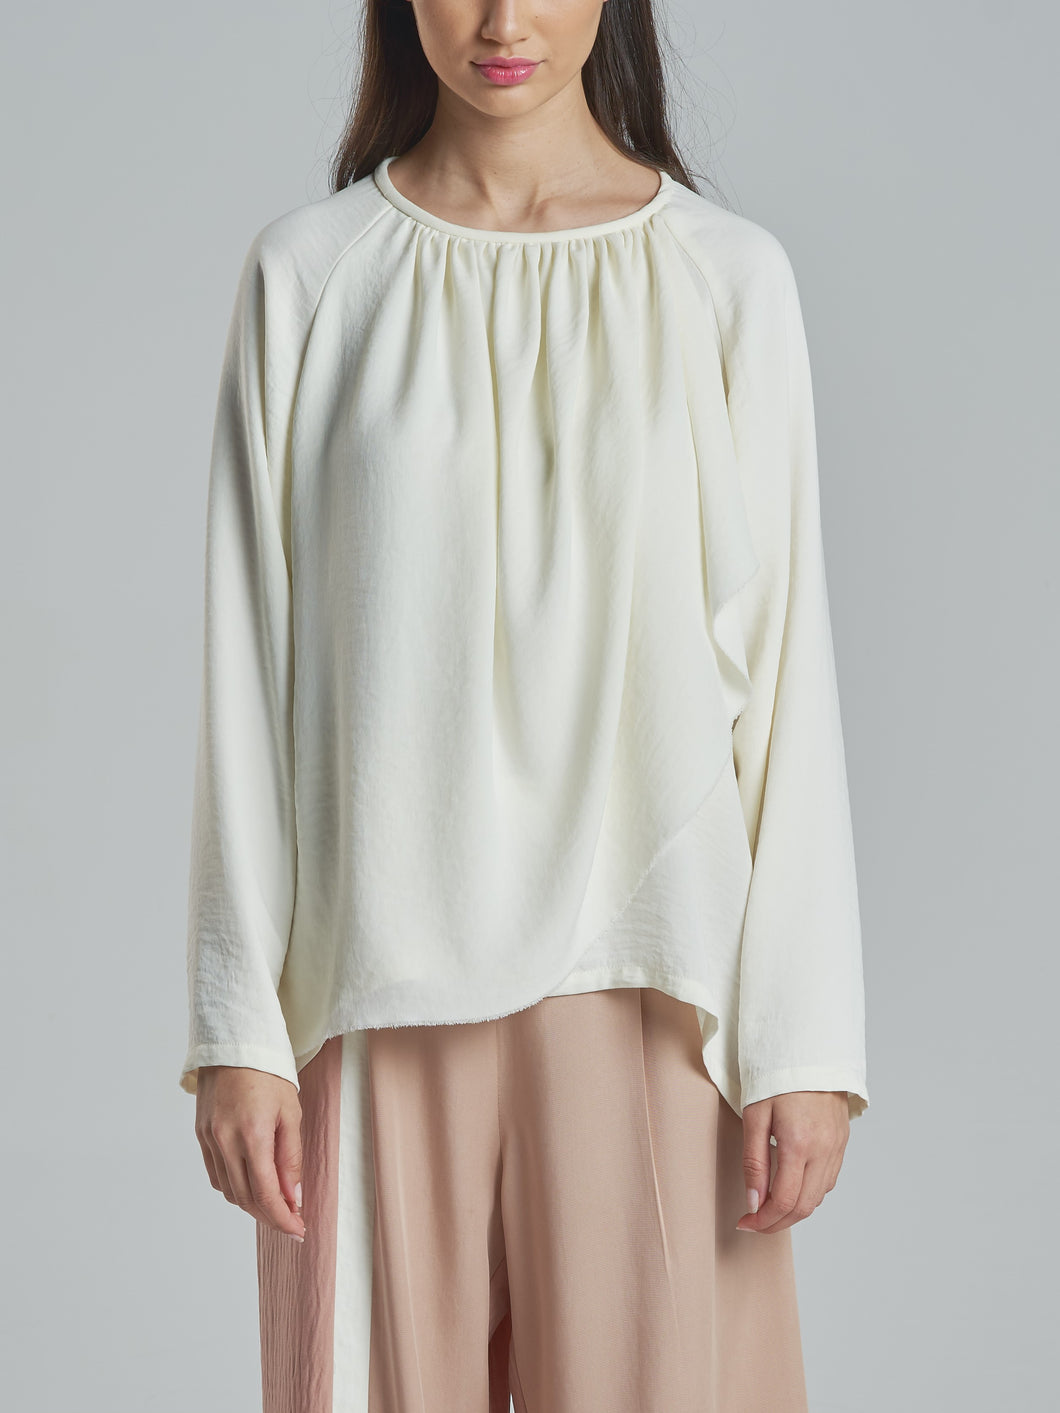 Elegant Off-White Top with Gathering